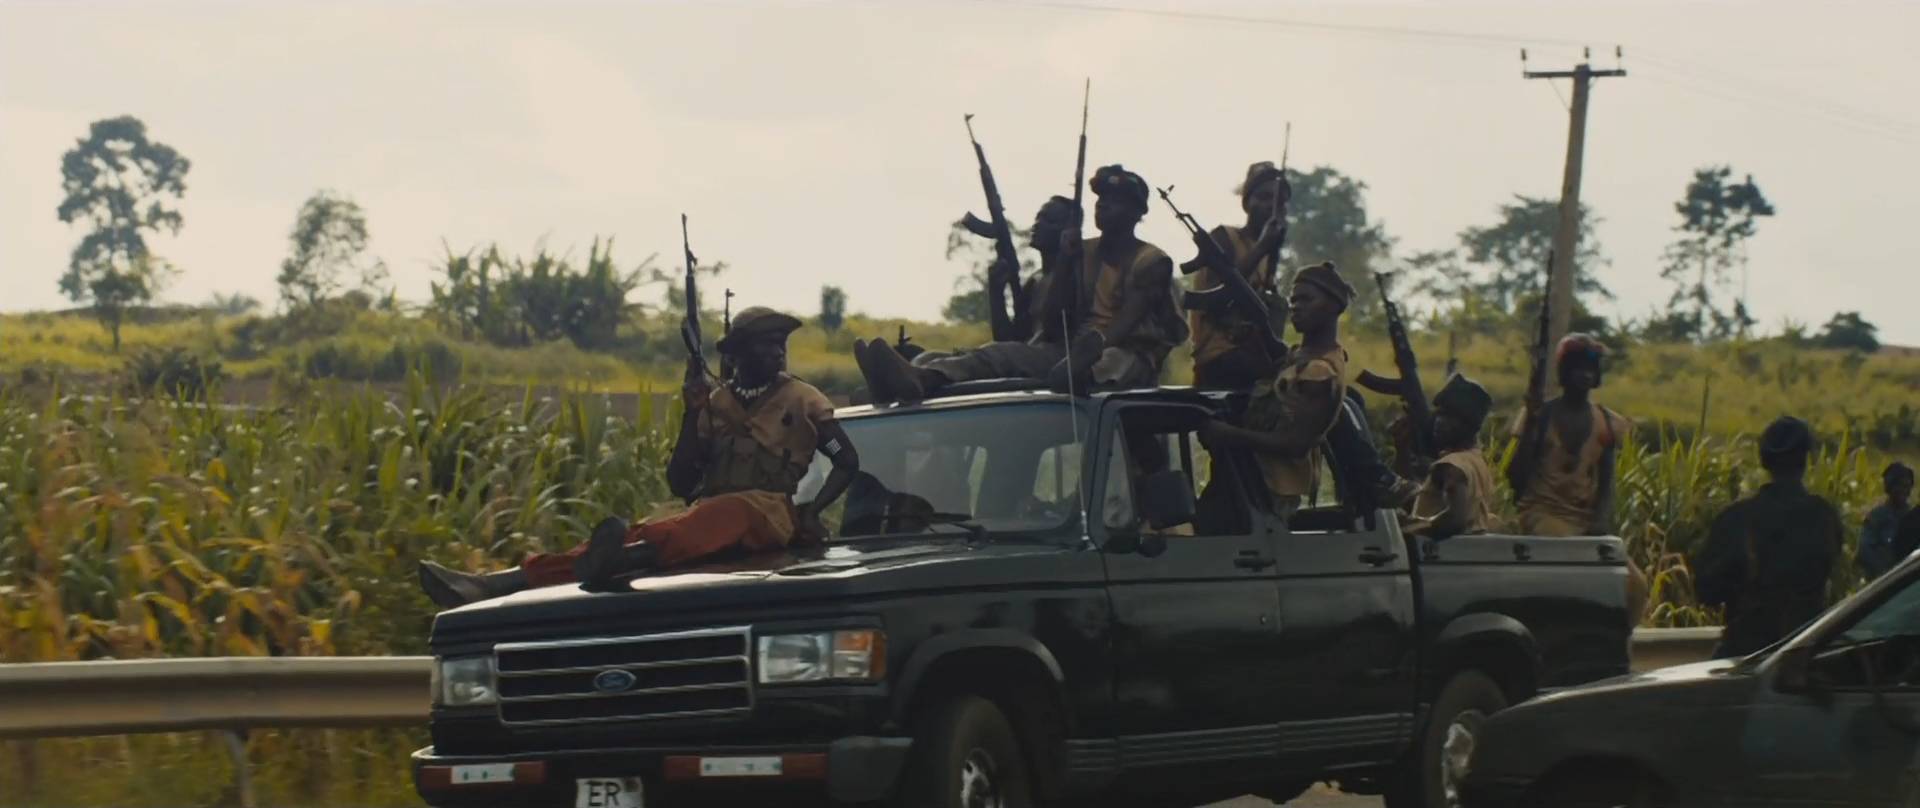 Beasts of No Nation / Beasts of No Nation (2015)